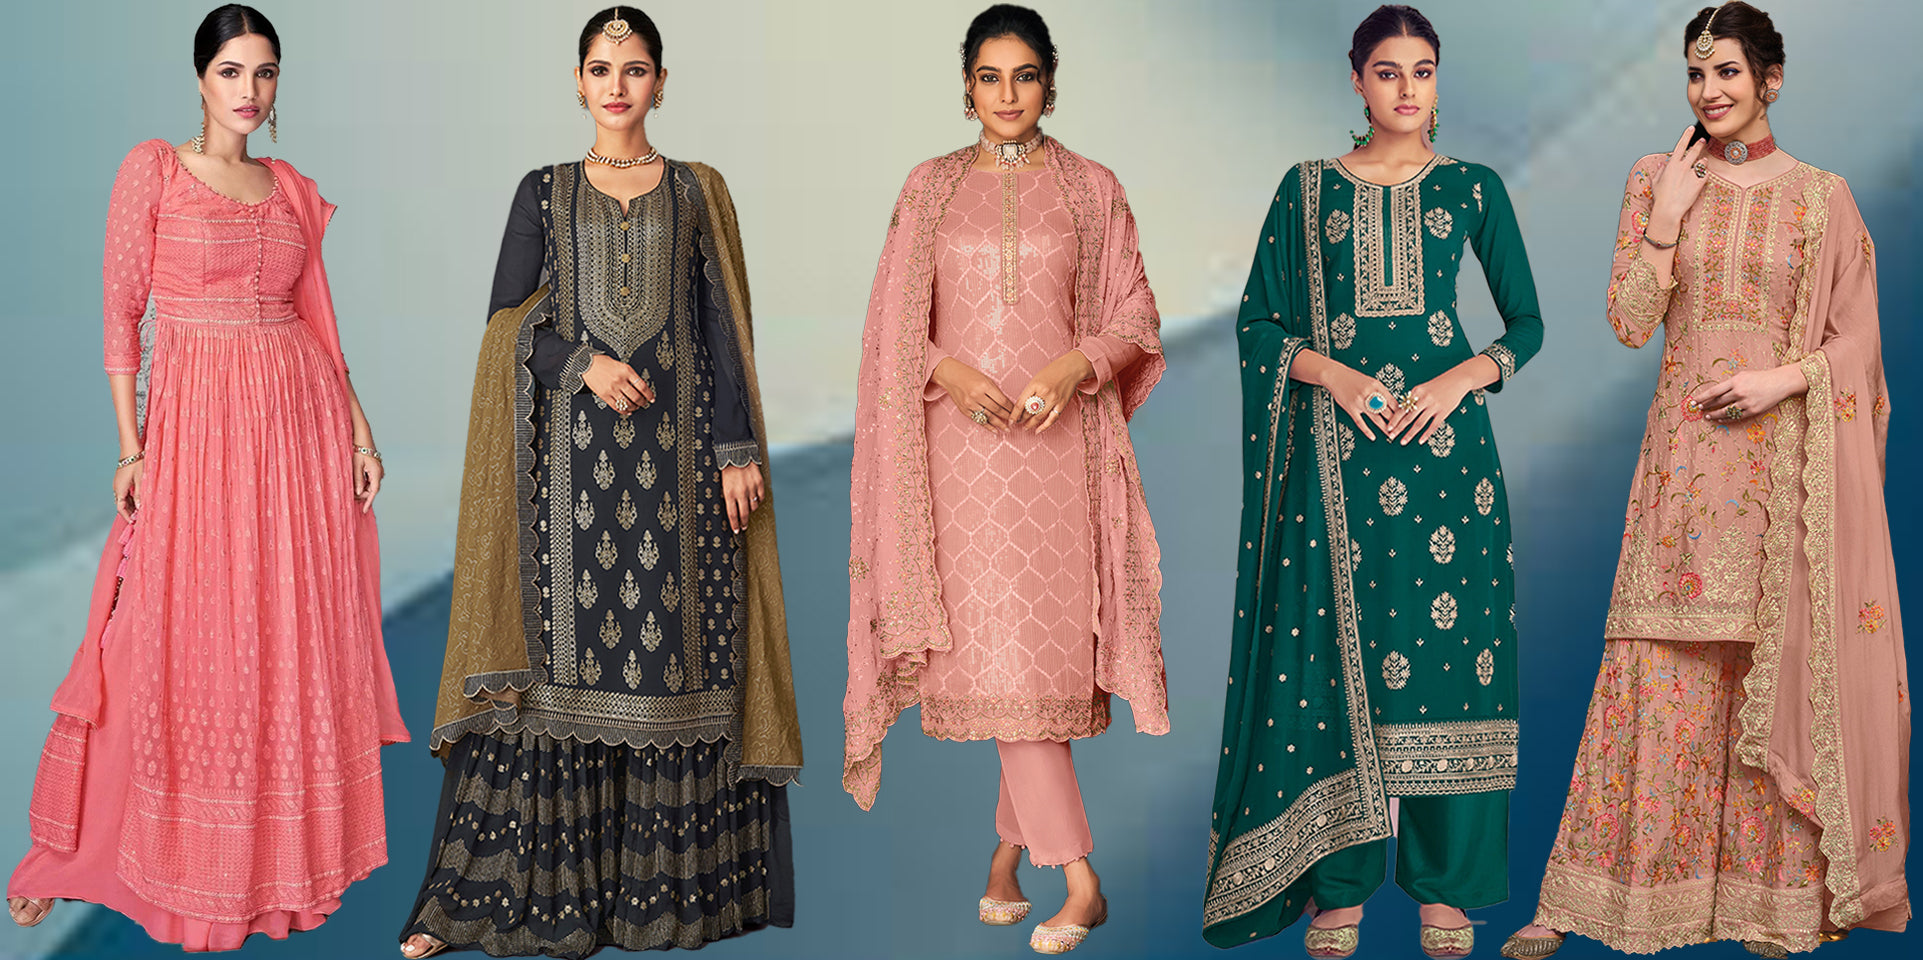 What are the Best Salwar Kameez Designs for this 2022 Navratri?